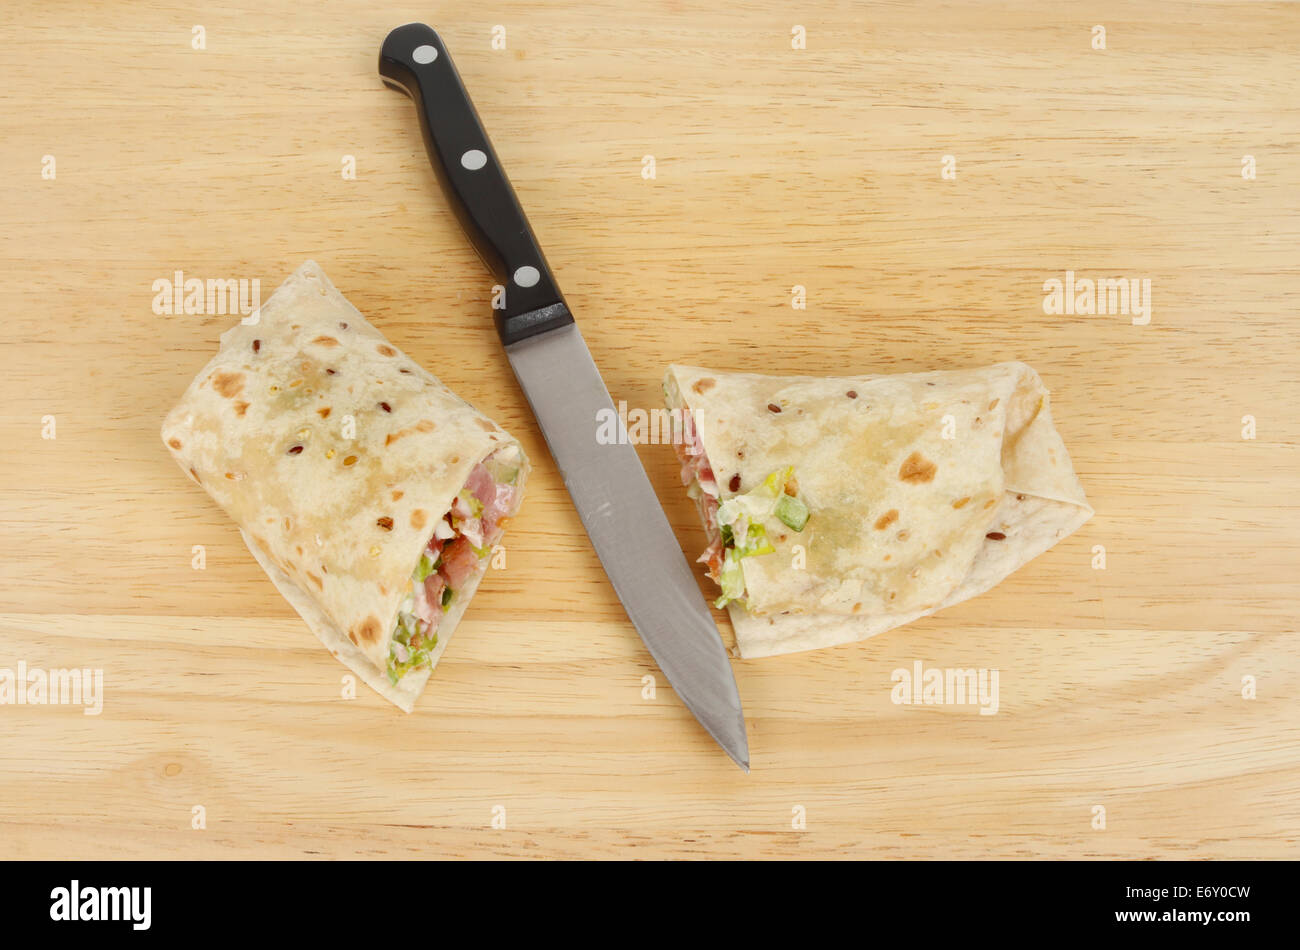 Cut bacon and salad bread wrap with a knife on a wooden board Stock Photo